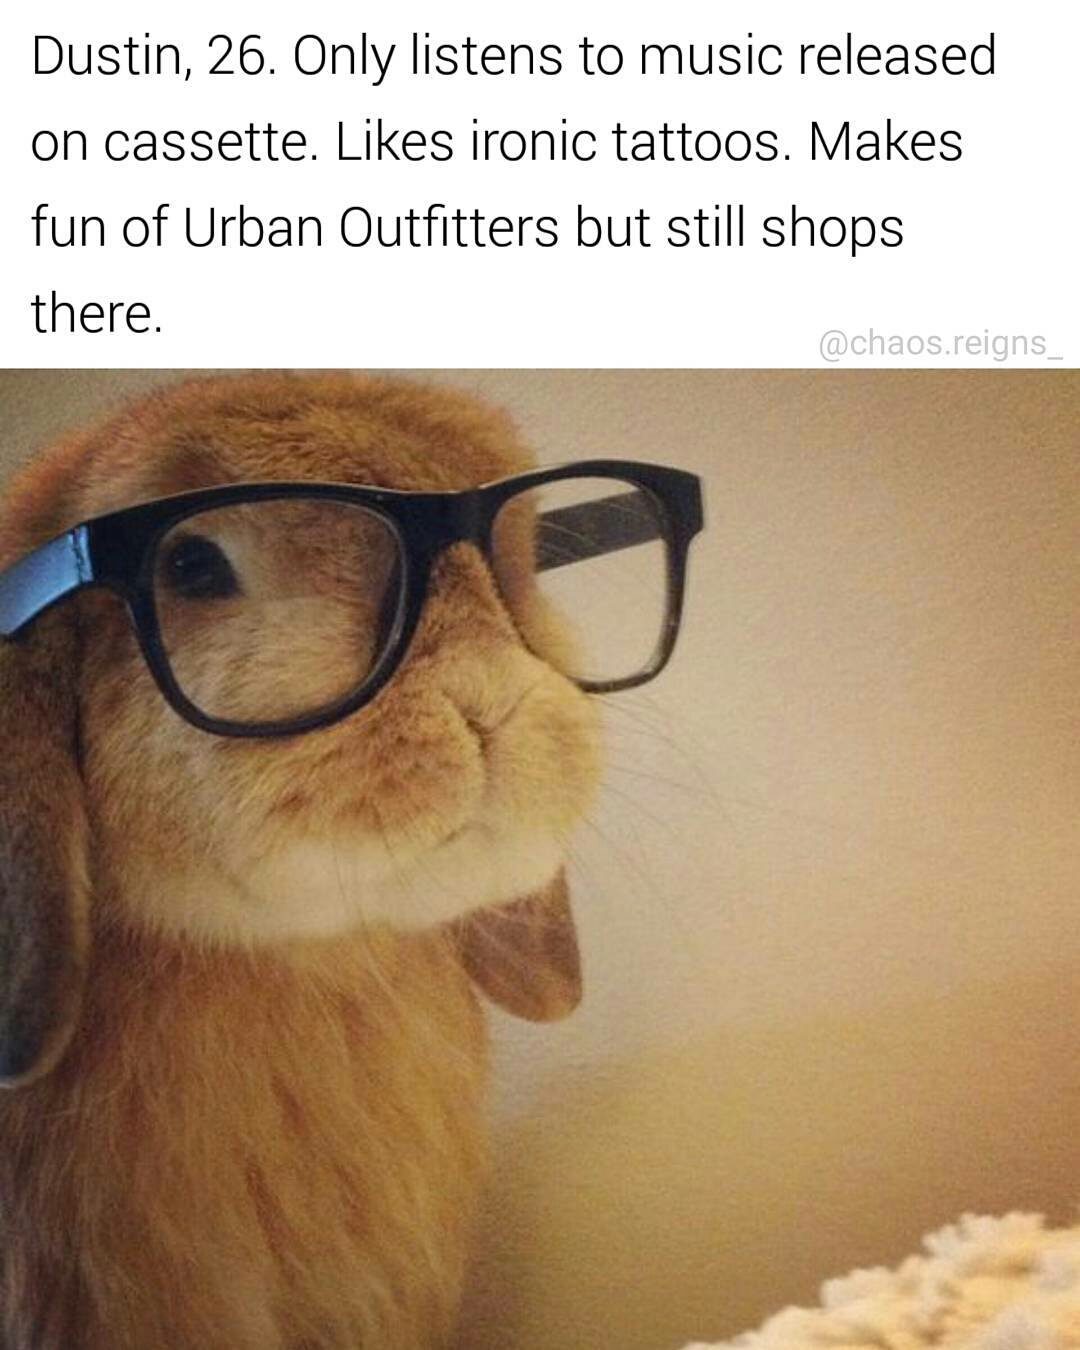 glasses bunny - Dustin, 26. Only listens to music released on cassette. ironic tattoos. Makes fun of Urban Outfitters but still shops there. .reigns